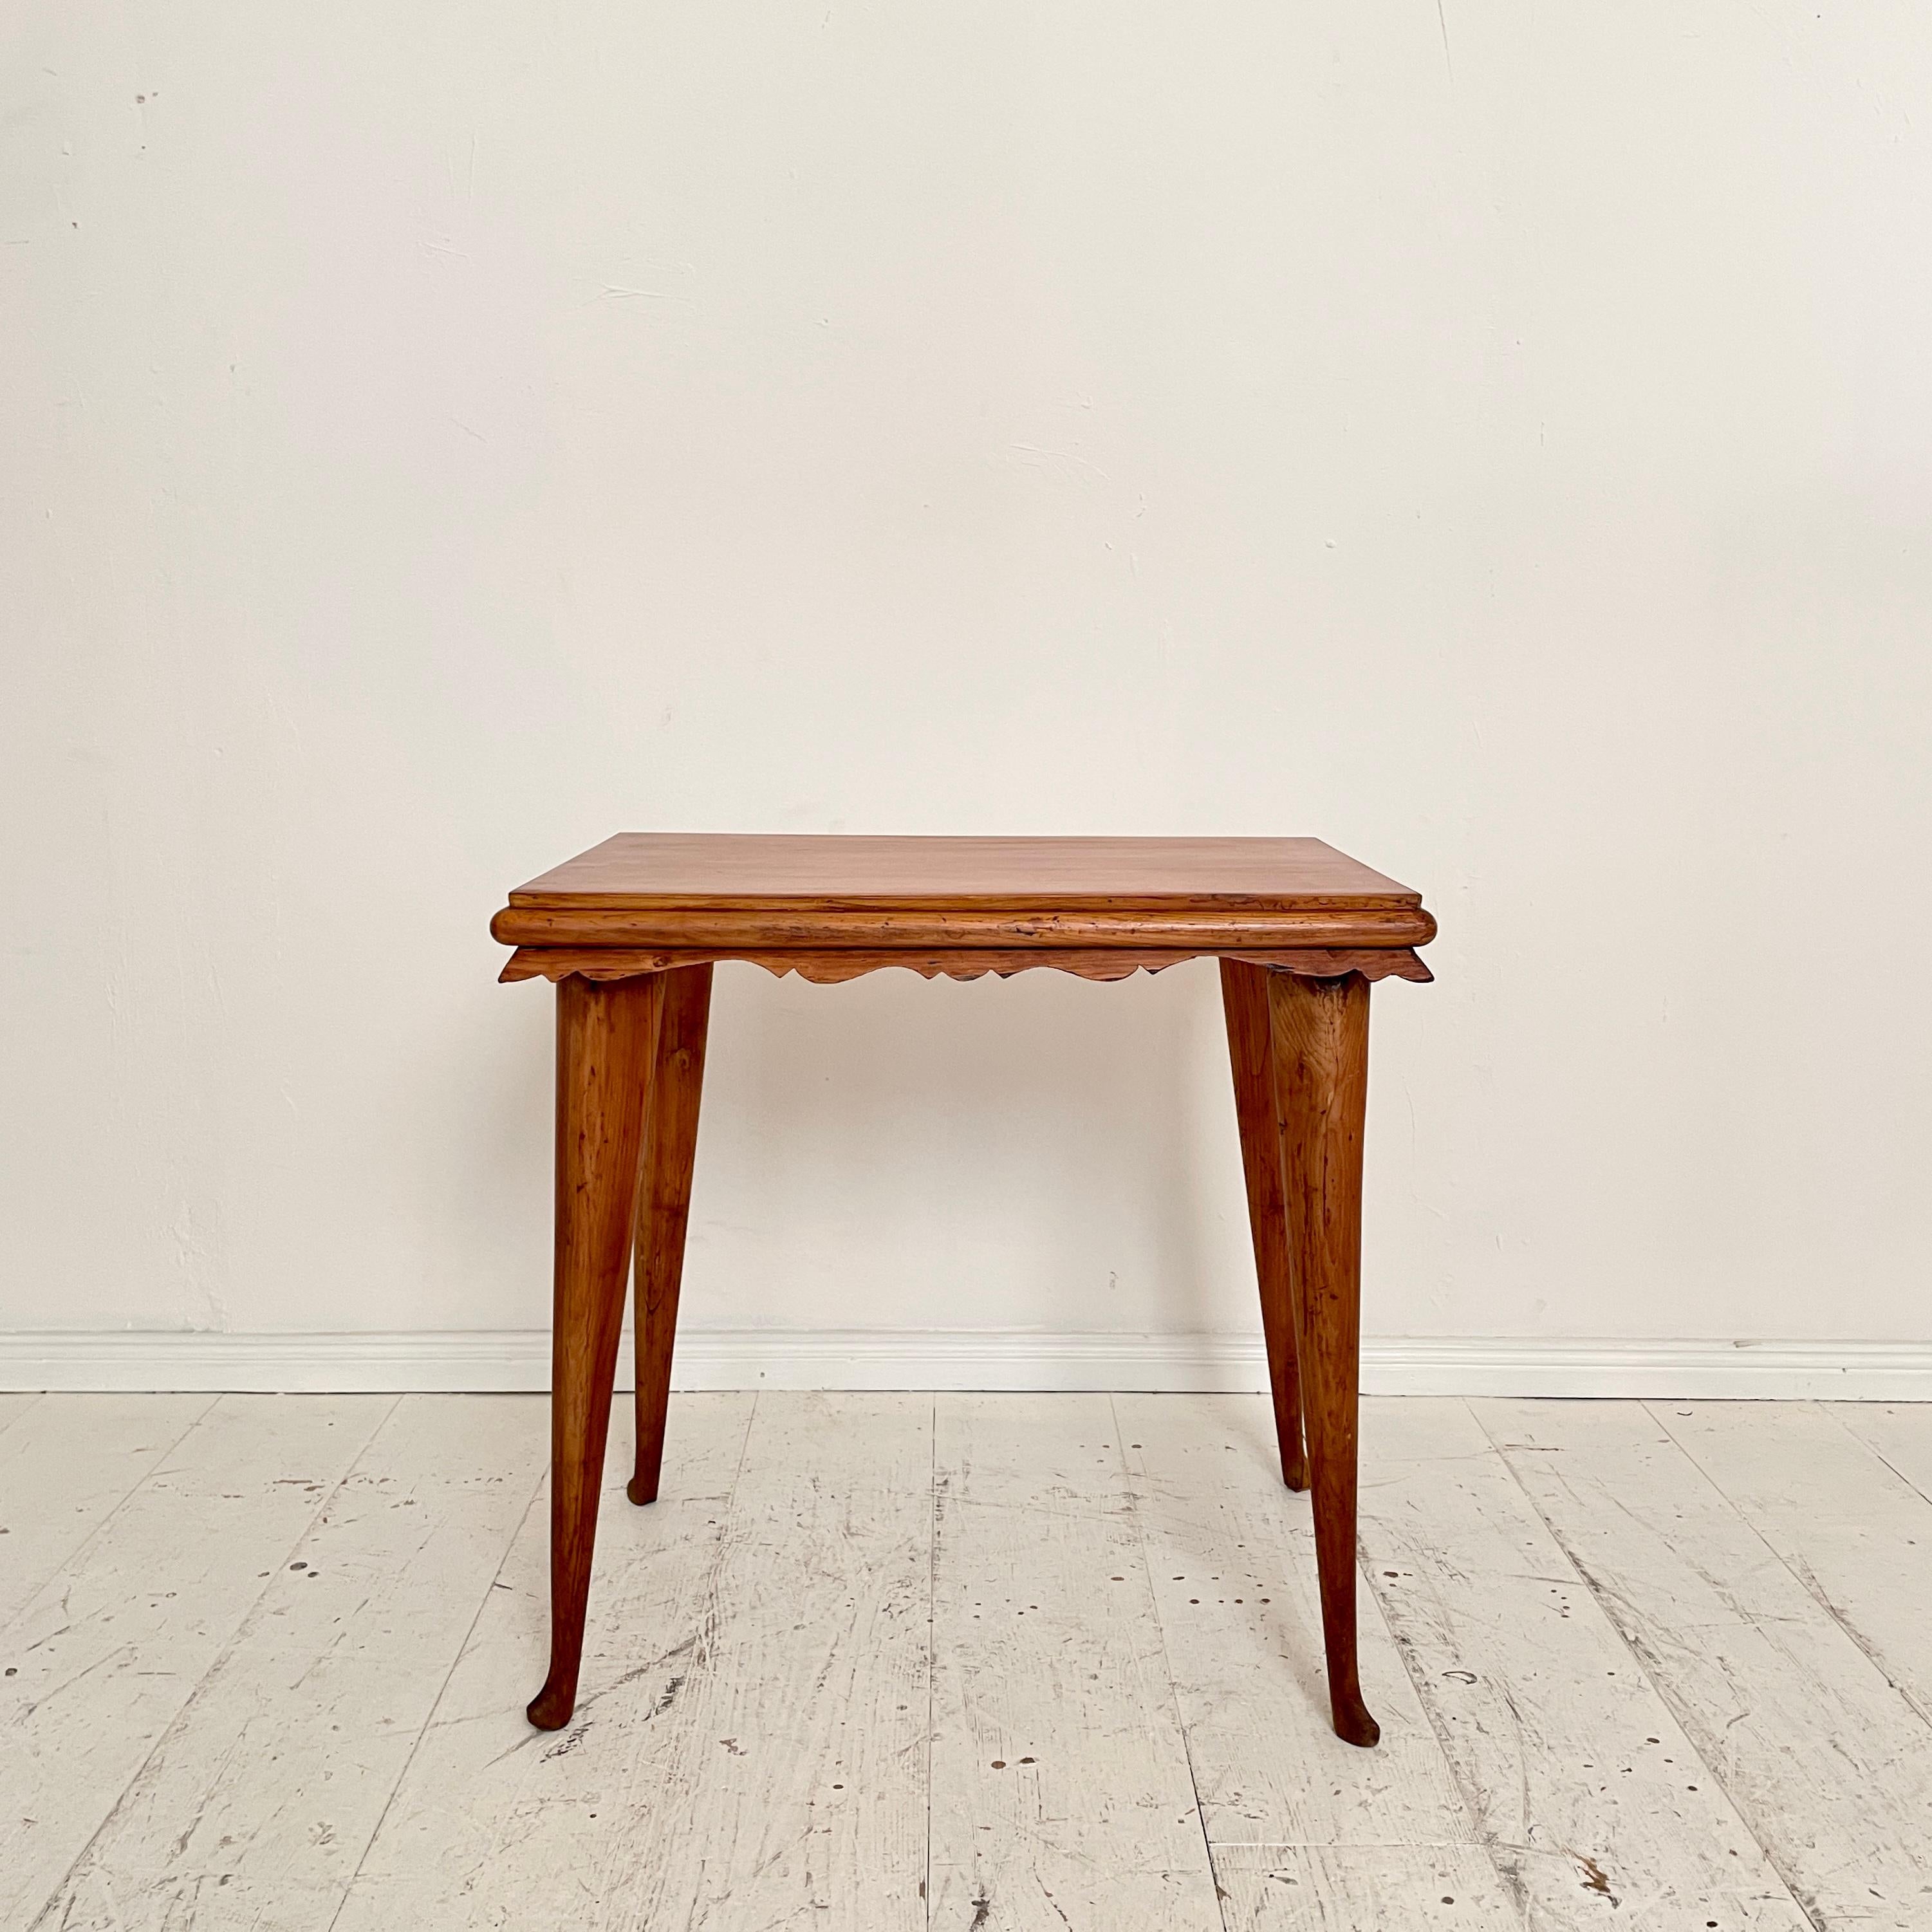 This fantastic Mid-Century Italian Side Table attributed to Paolo Buffa was made in Cherry Wood around 1948.
The table is in great vintage condition.
A unique piece which is a great eye-catcher for your antique, modern, space age or mid-century